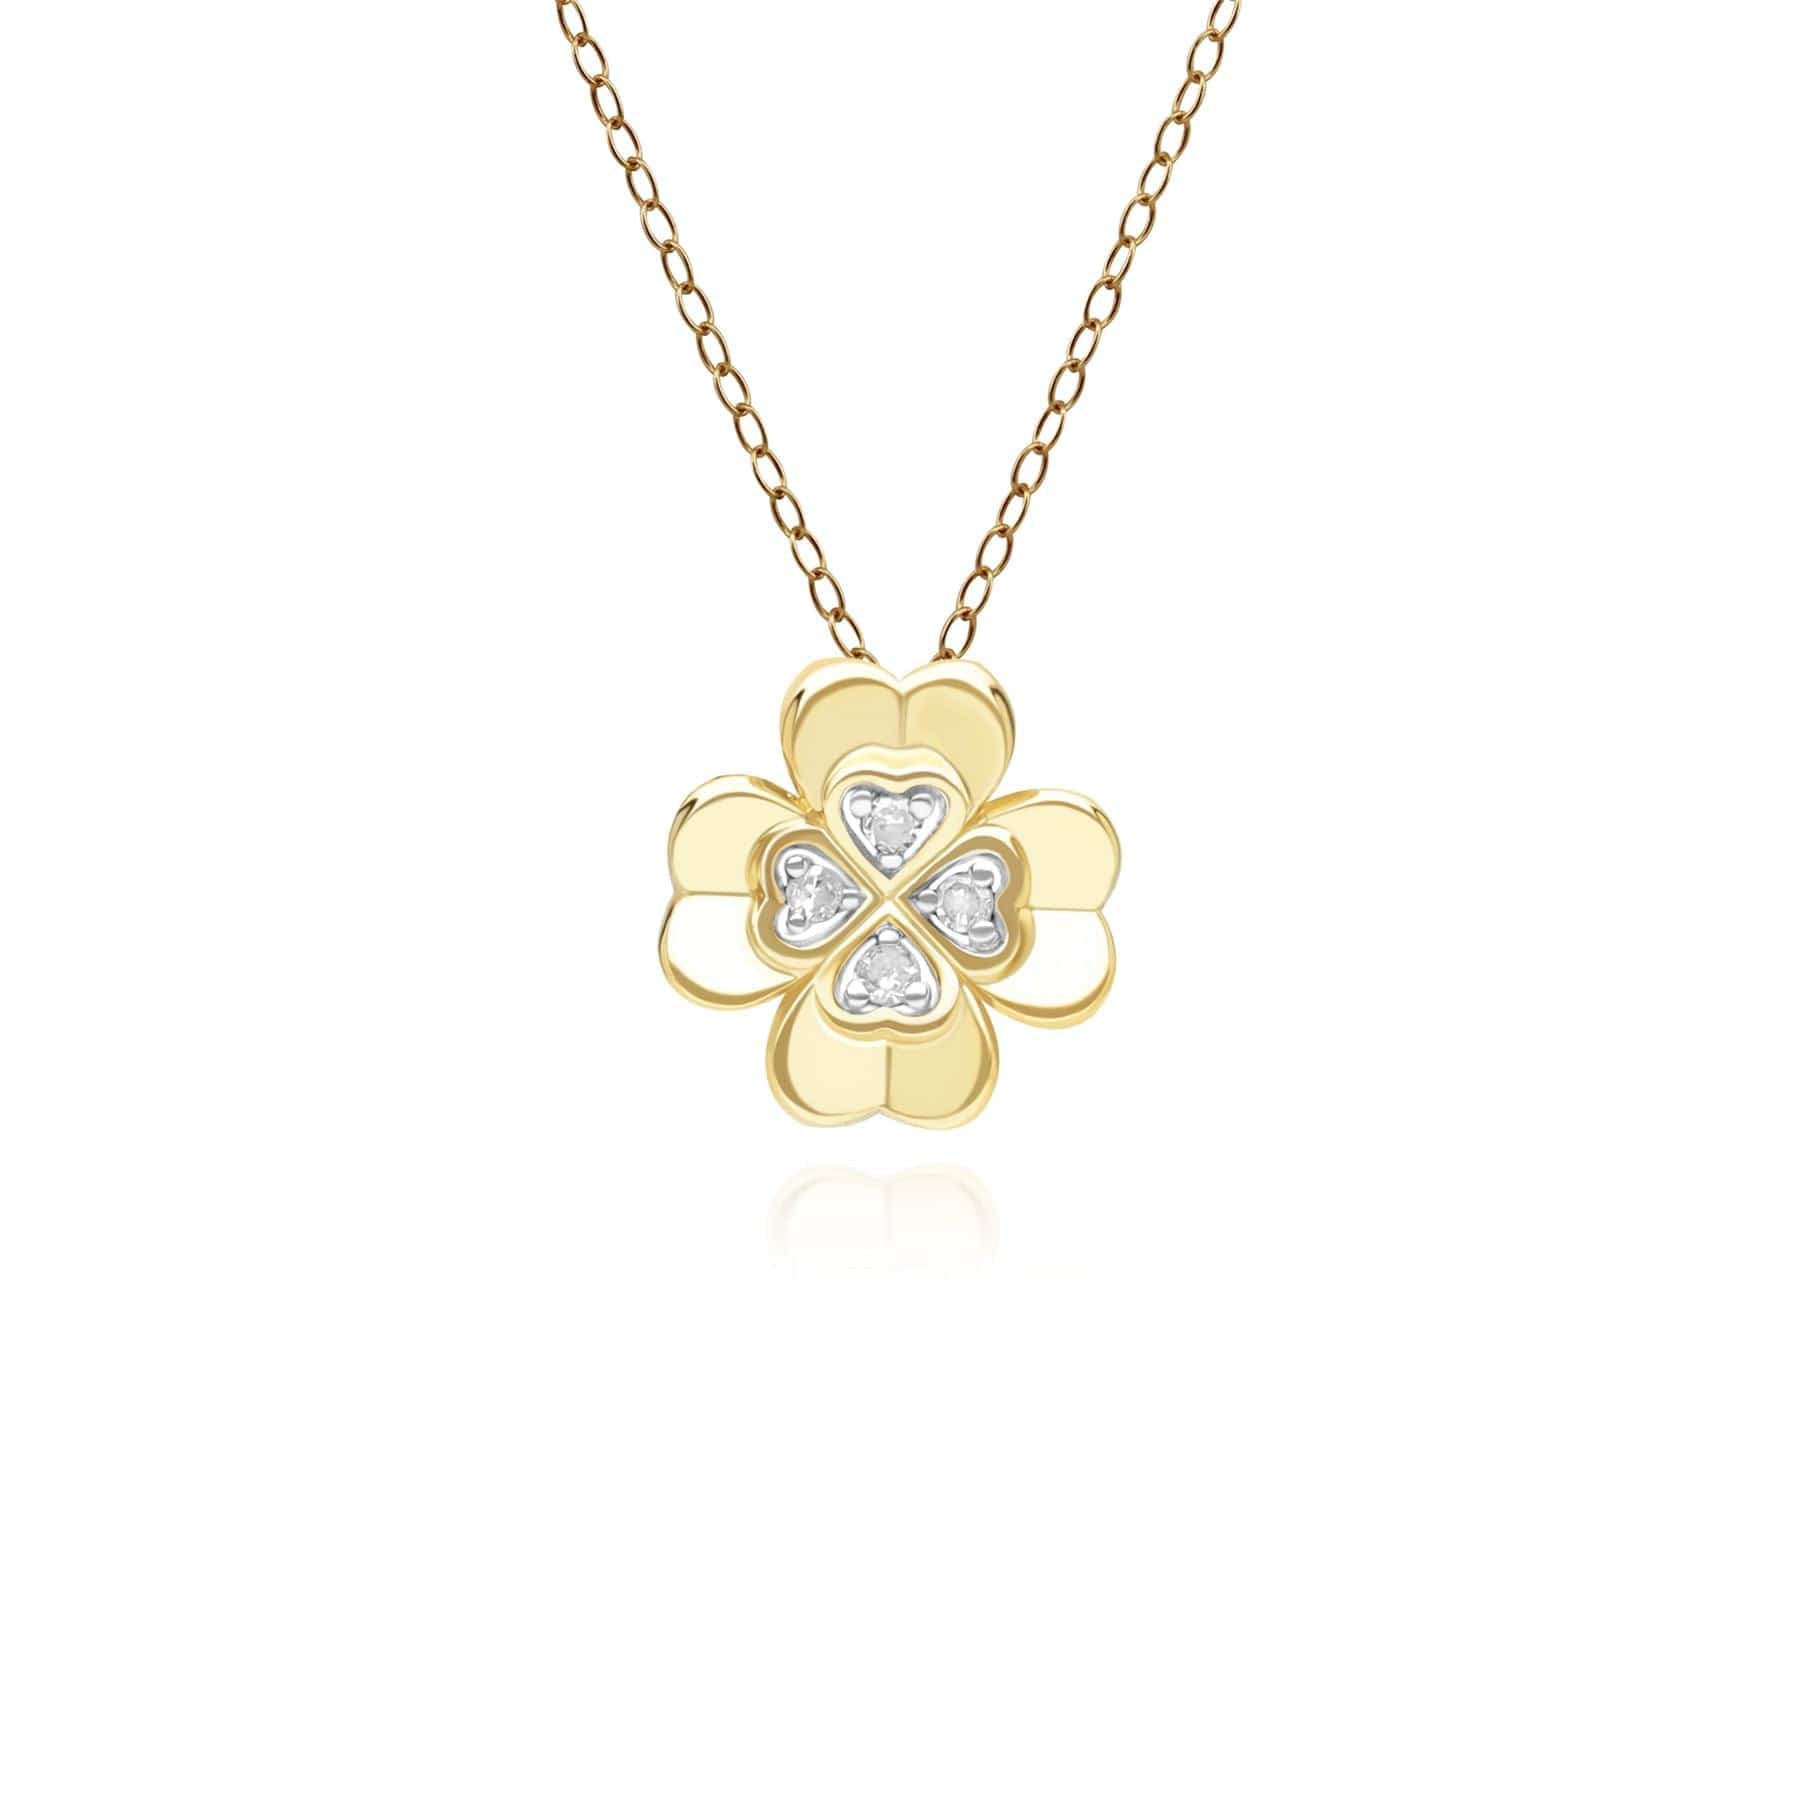 149P1309019 Gardenia Diamond Clover Pendant Necklace in 9ct Yellow Gold Front